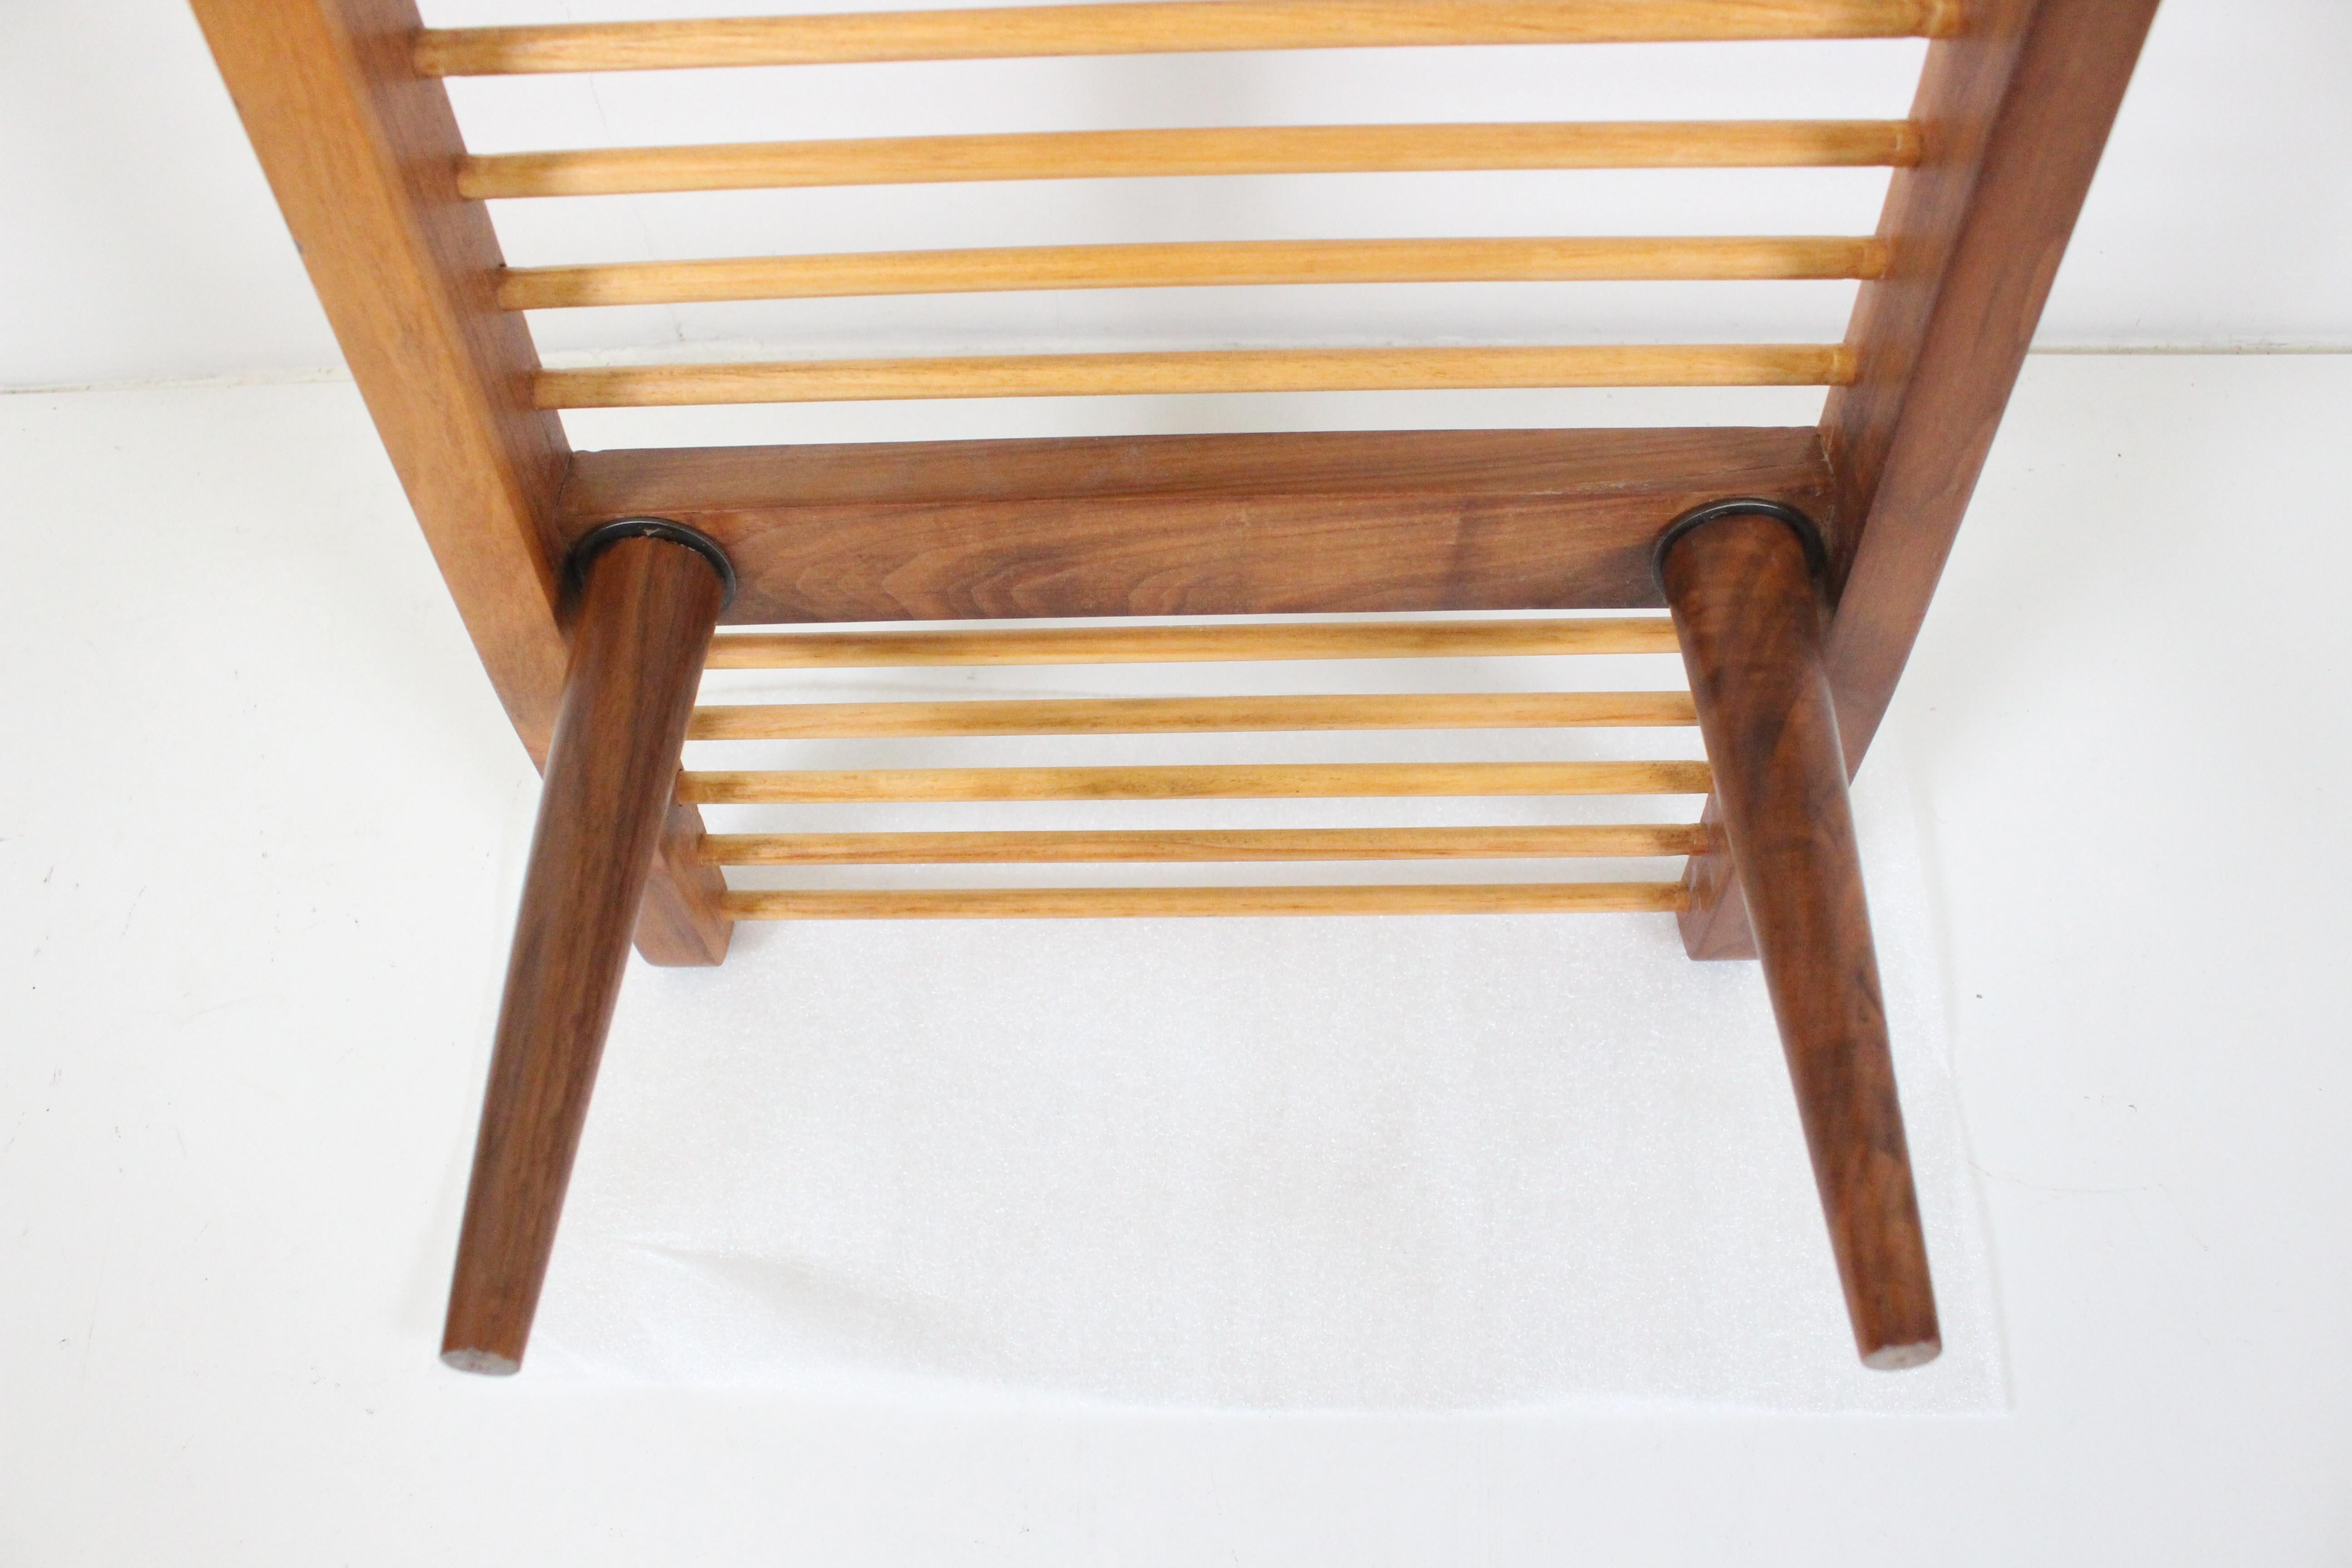 Milo Baughman Walnut and Maple Long Dowel Bench, 1950s For Sale 5